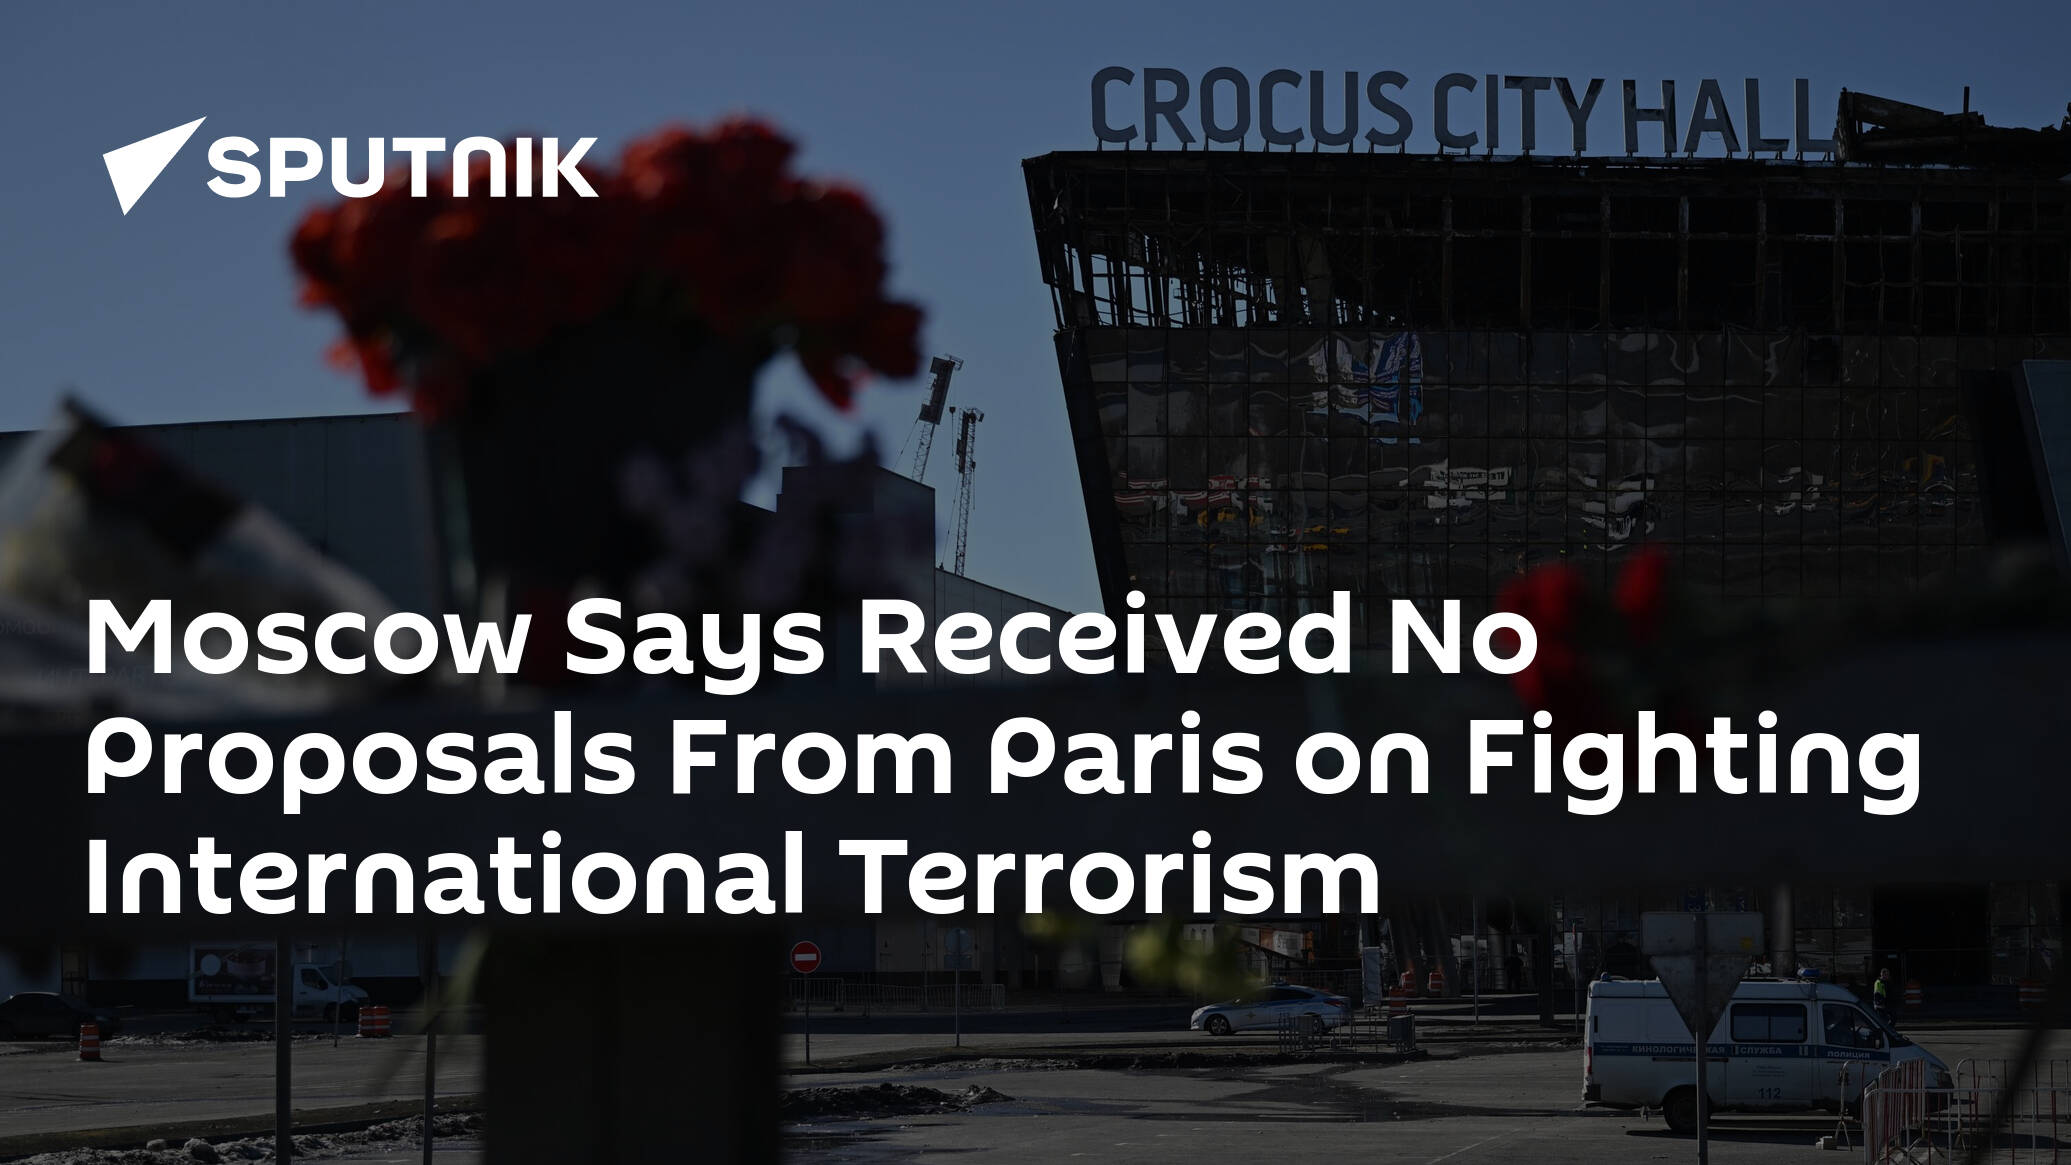 Moscow Says Received No Proposals From Paris on Fighting International Terrorism